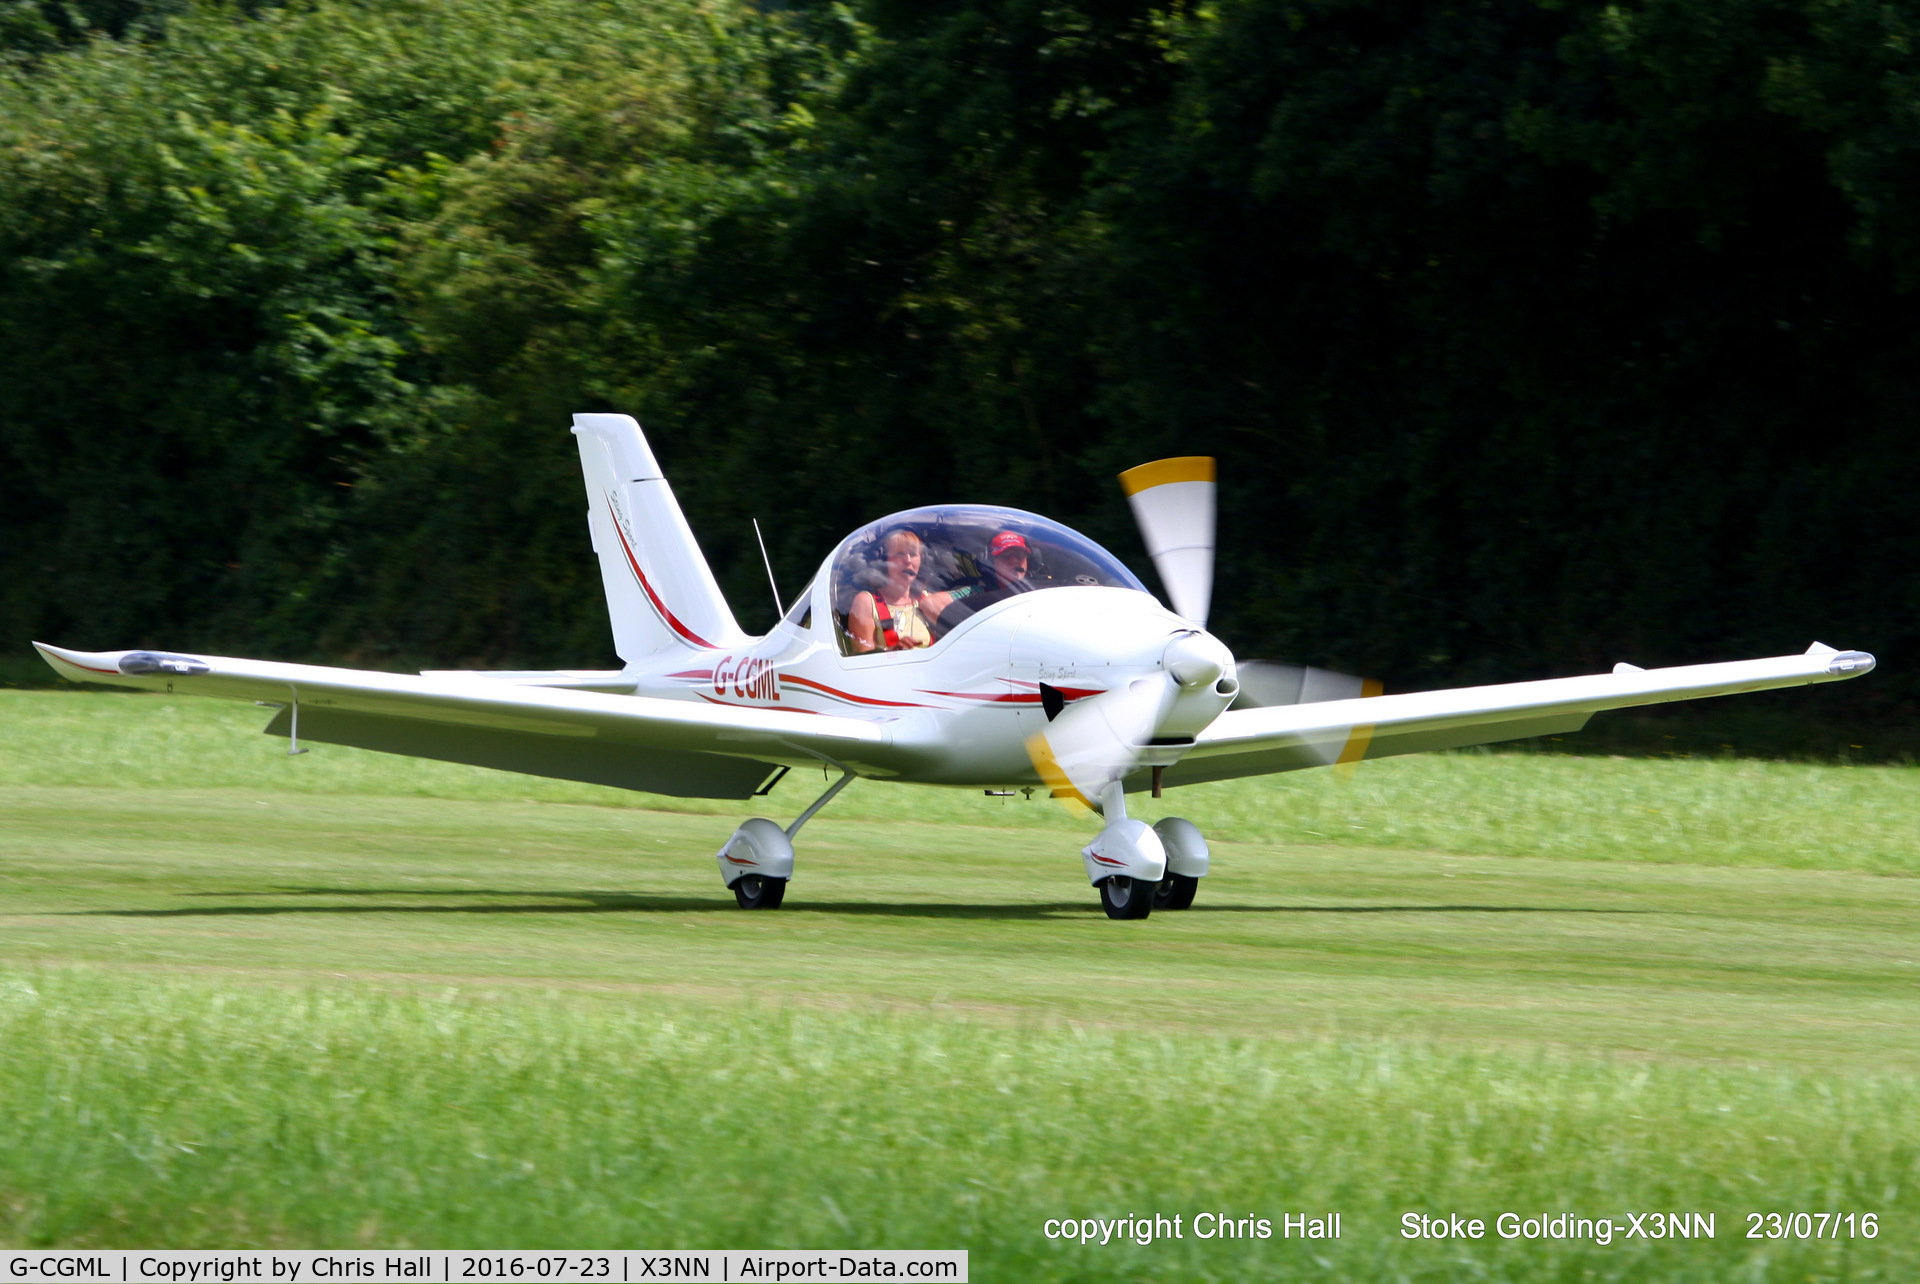 G-CGML, 2010 TL Ultralight TL-2000 Sting Carbon C/N LAA 347-14796, Stoke Golding Stakeout 2016